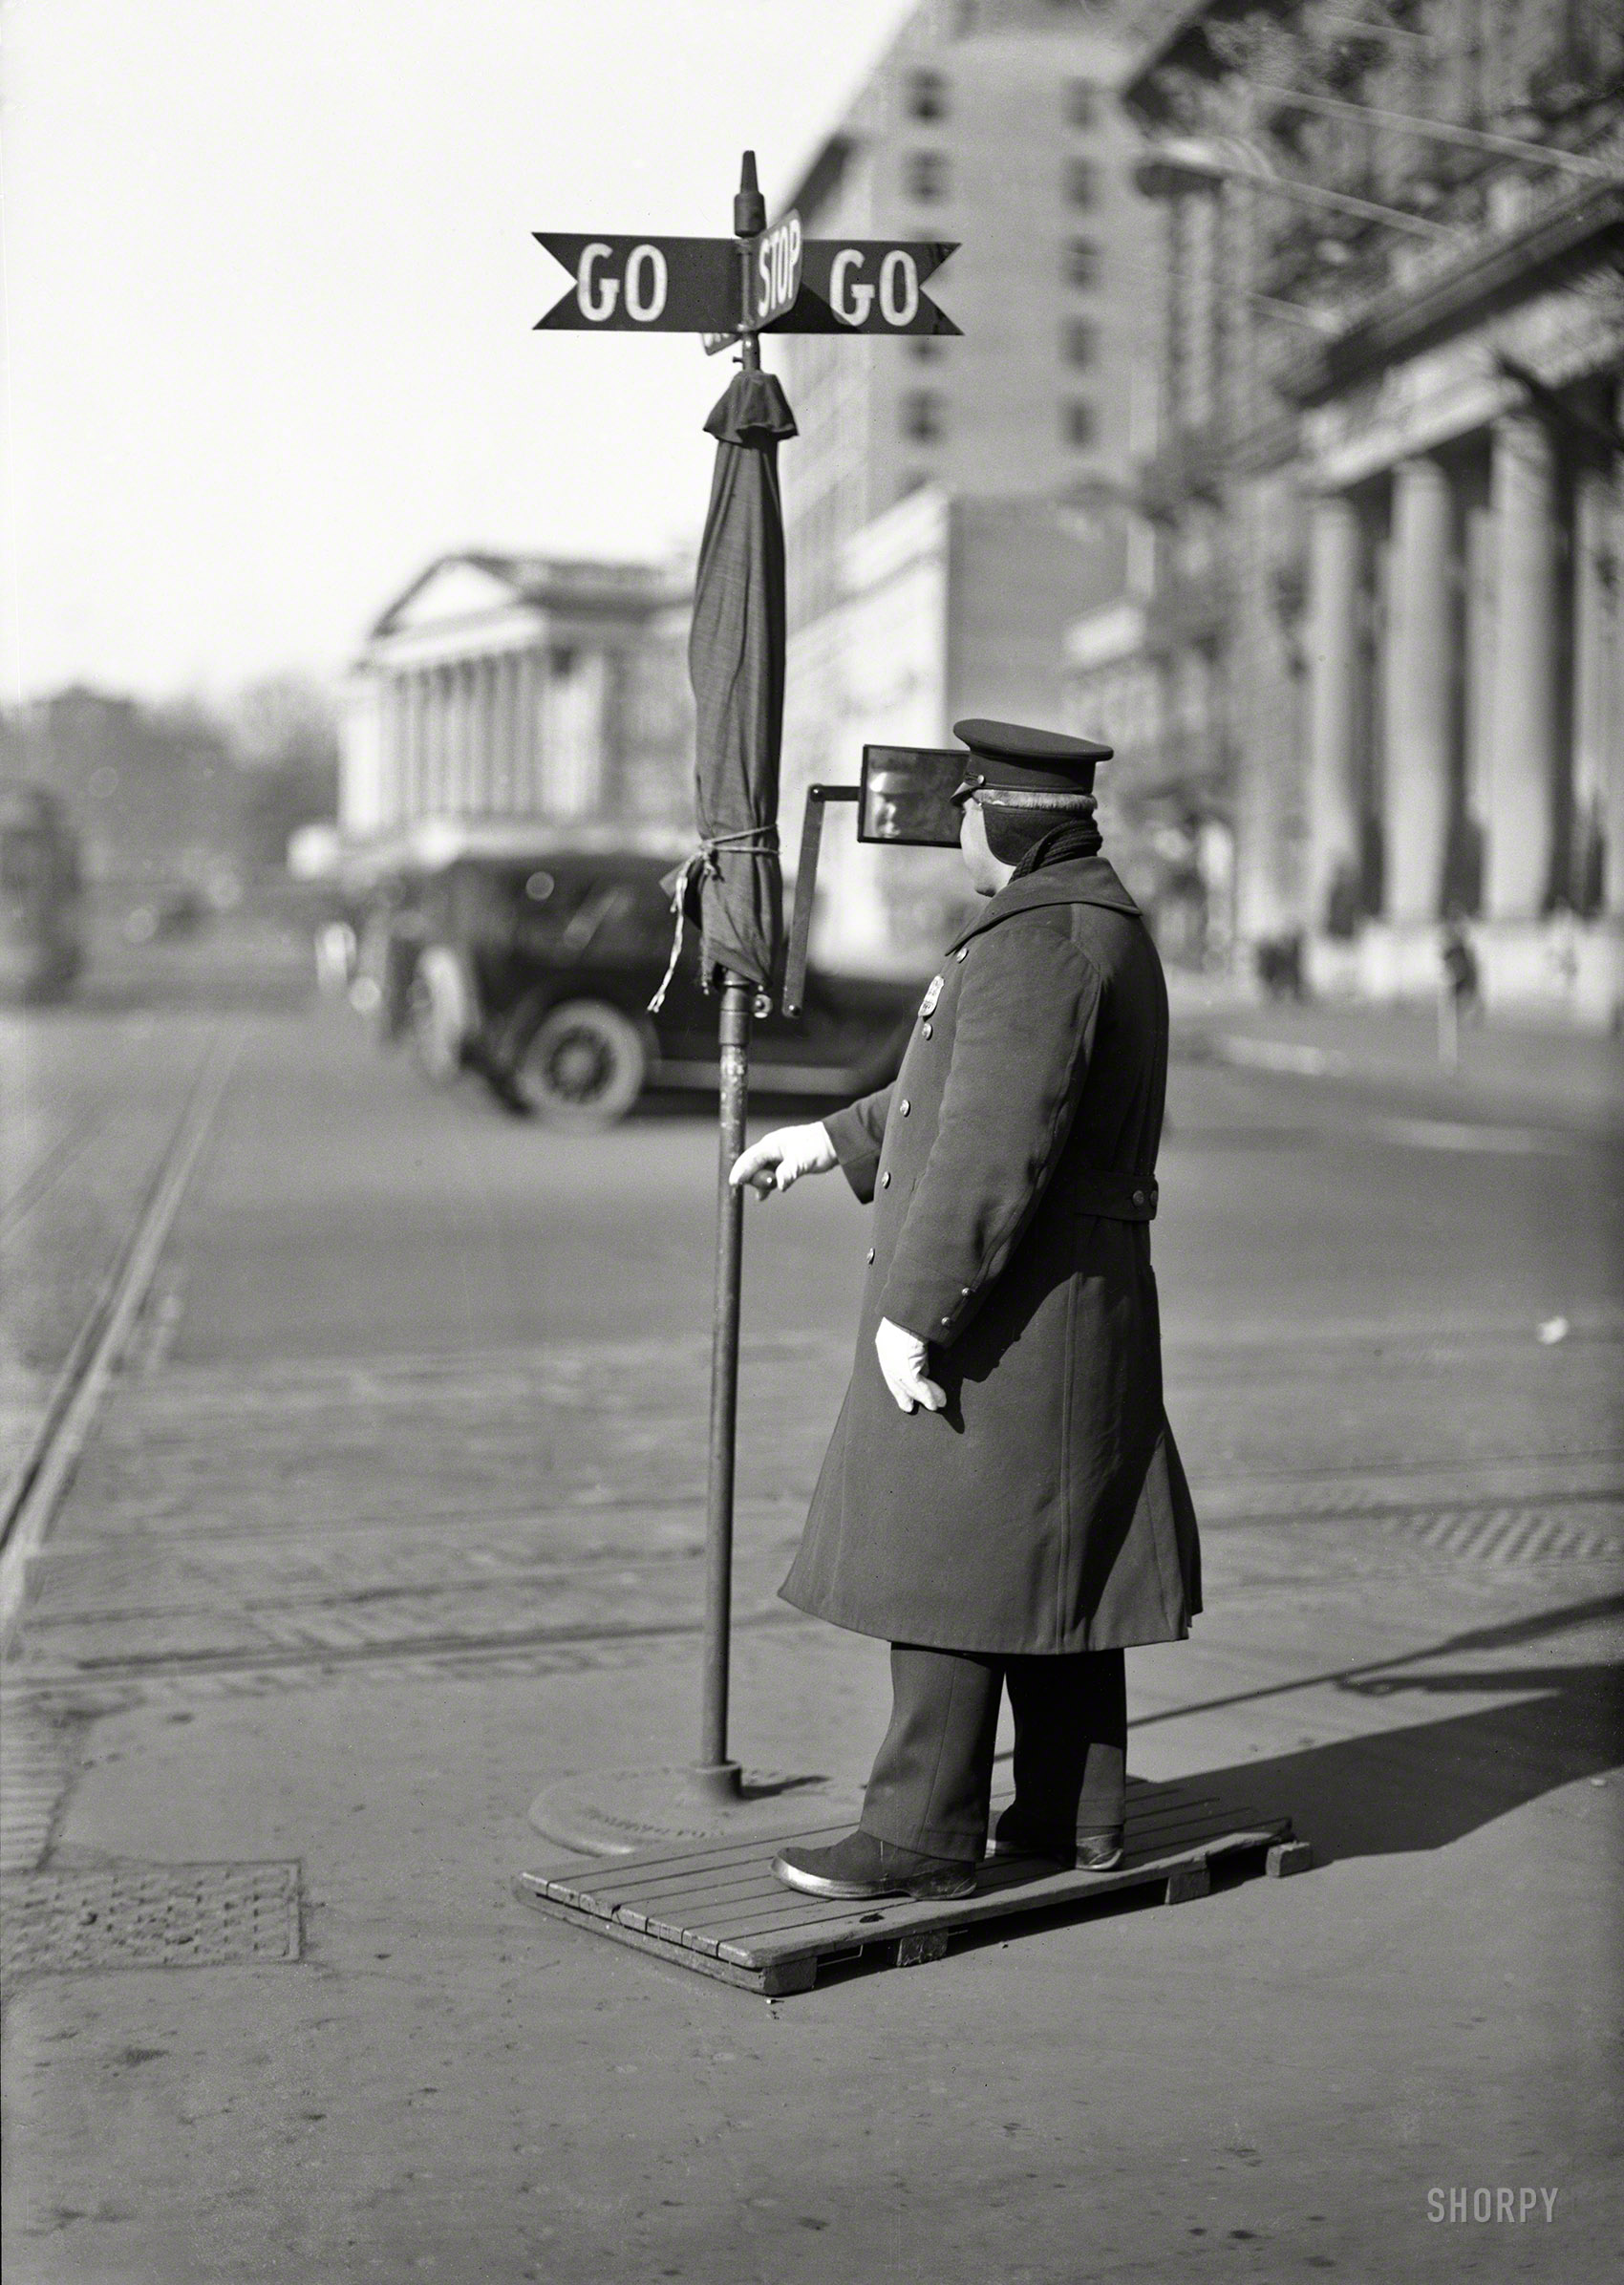 Circa 1919. "Traffic officer at 14th Street and Pennsylvania Avenue." Before stoplights in the District of Columbia, there was the "Go-Go" traffic sign equipped with umbrella and rearview mirror. The Willard Hotel and U.S. Treasury play supporting roles in this Harris & Ewing glass negative. View full size.